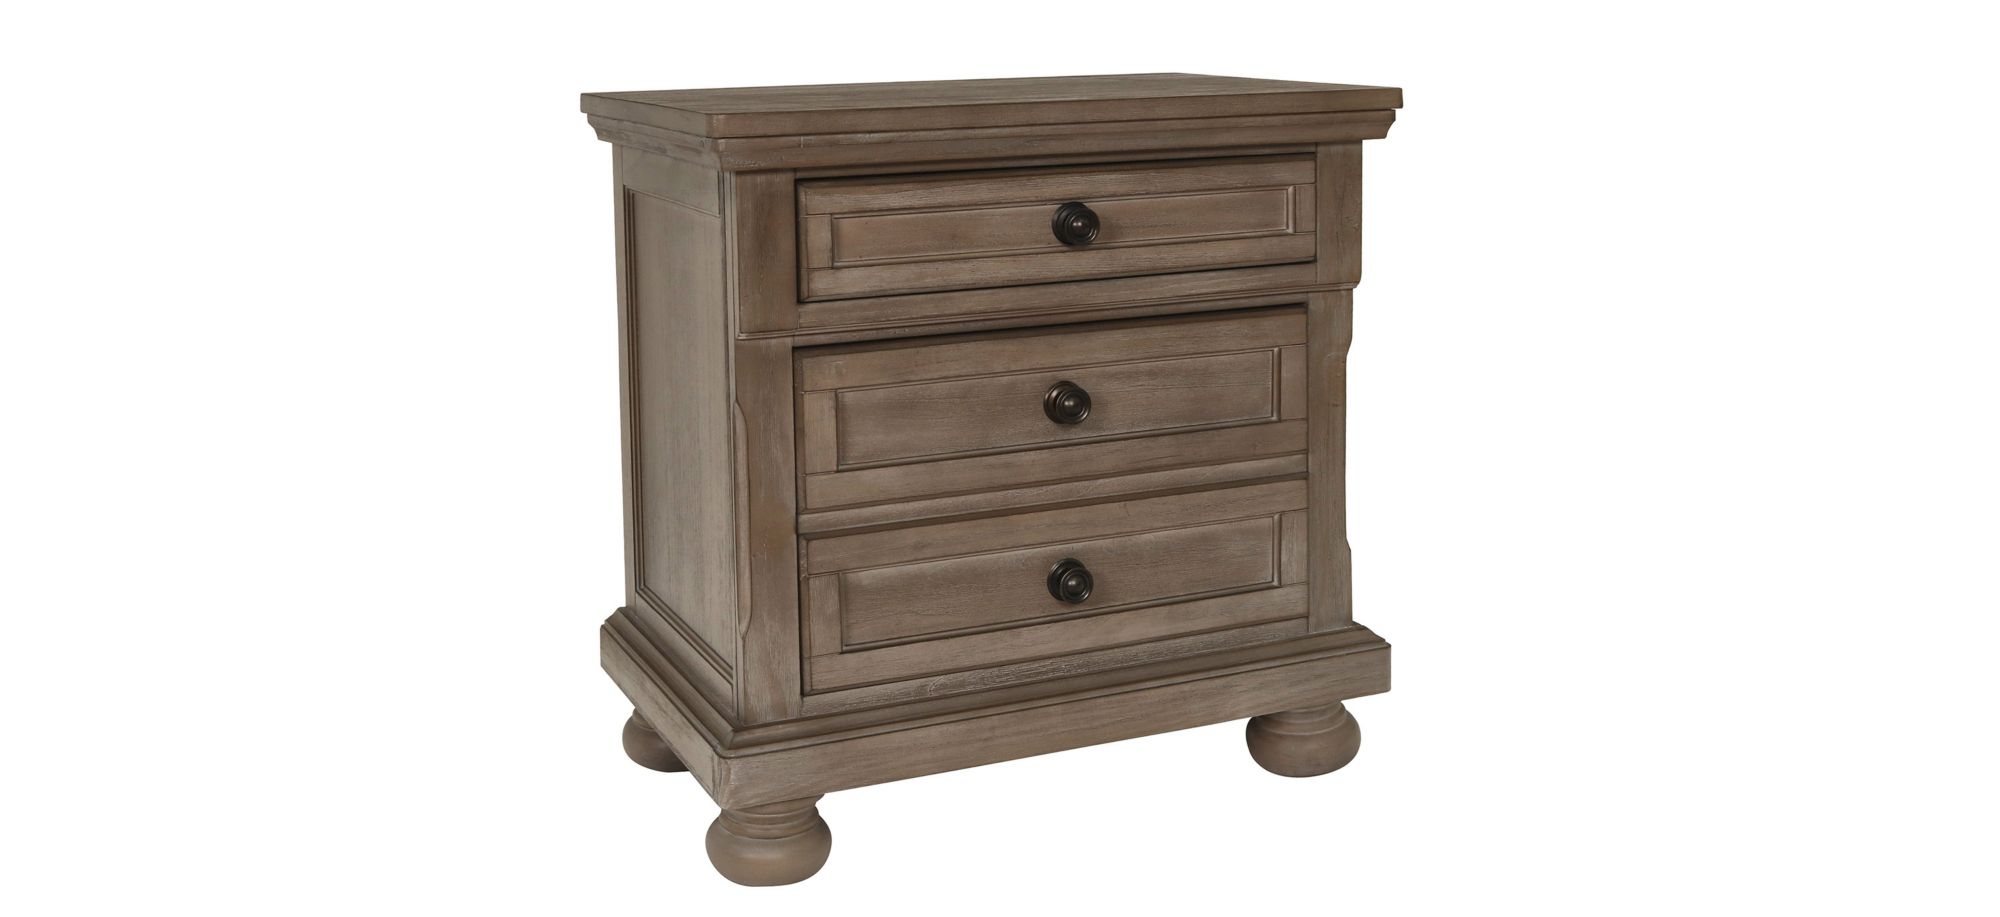 Allegra Nightstand in Pewter by New Classic Home Furnishings